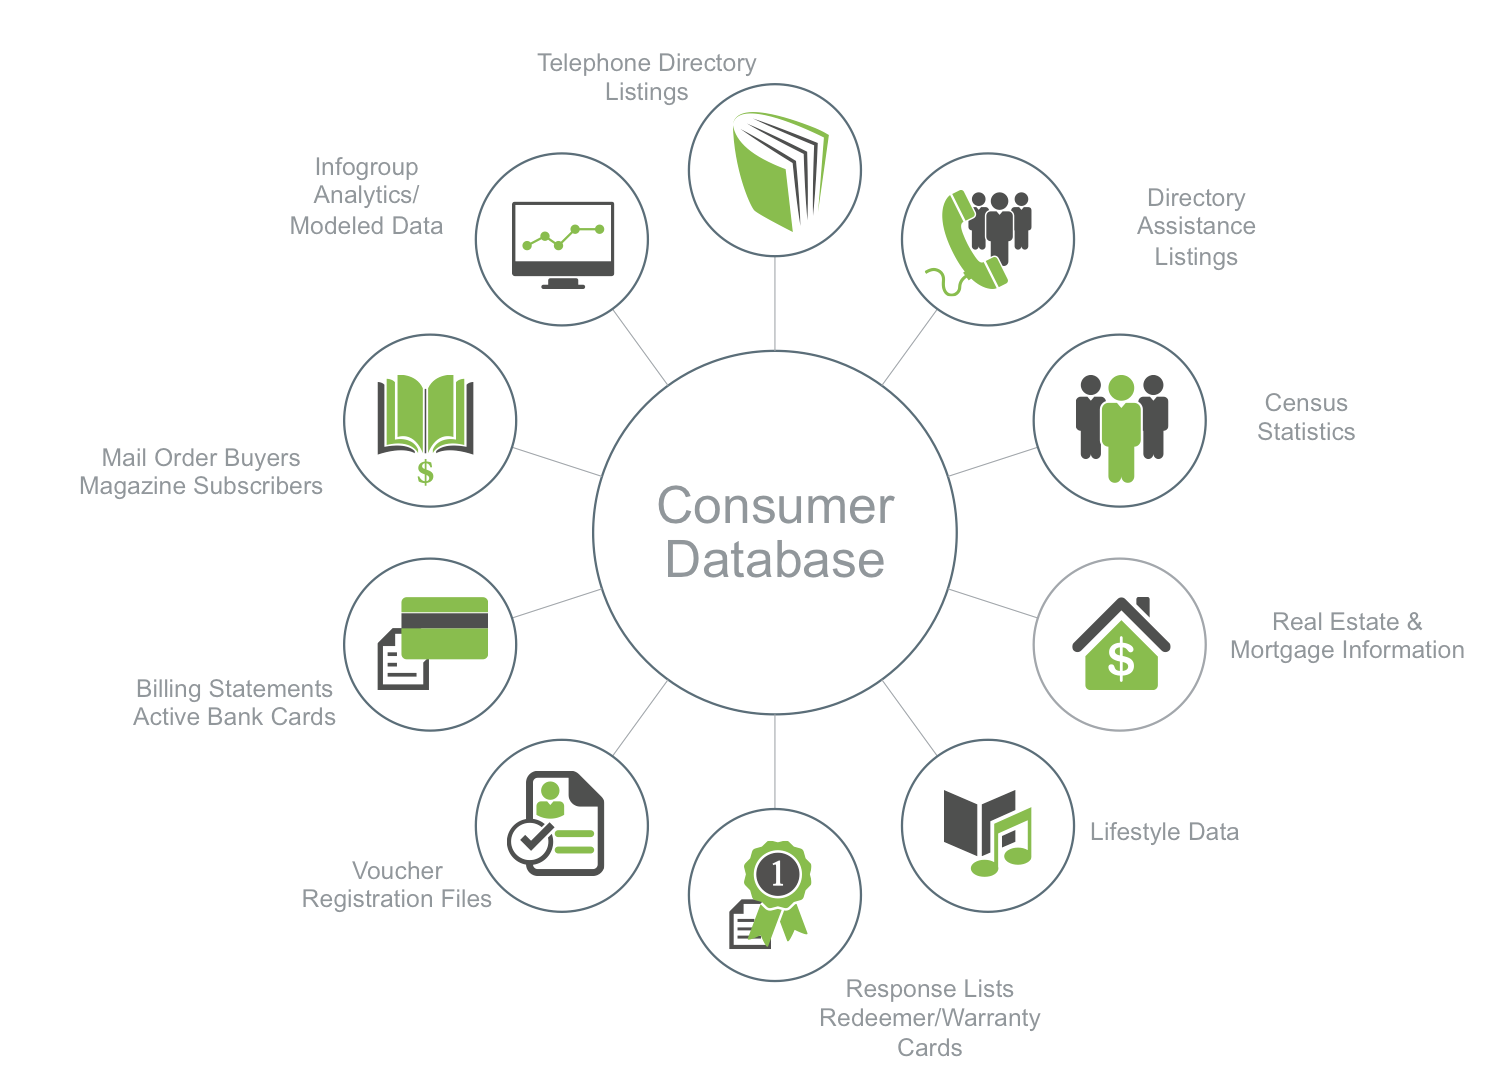  A infographic on types of consumer data, including lifestyle data, census statistics, telephone directory listings, response lists, real estate and mortgage information, billing statements, active bank cards, mail order buyers, magazine subscribers, infogroup analytics, directory assistance listings, and voucher registration files.